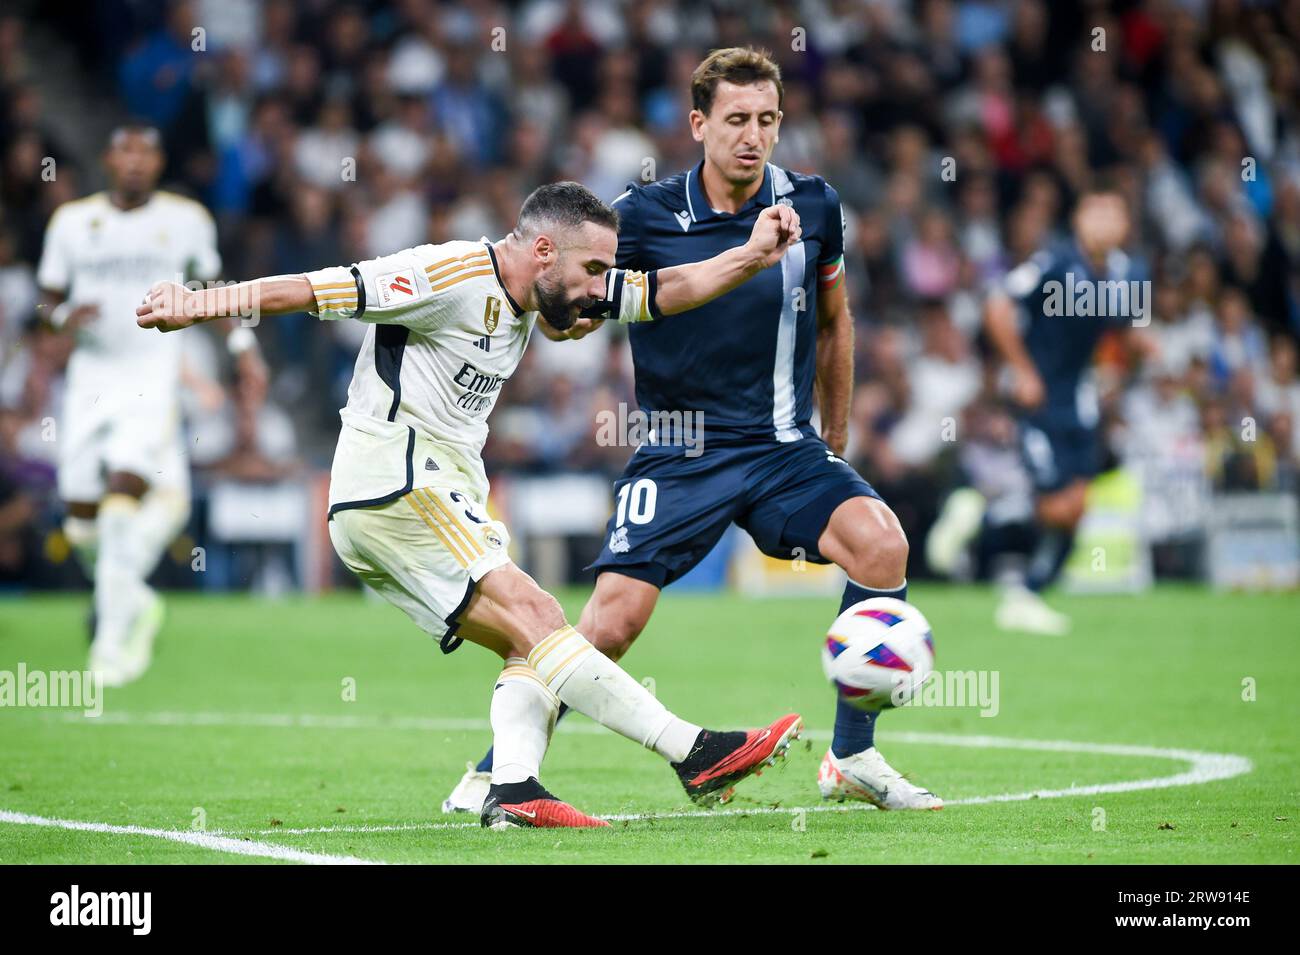 Madrid, Spain. 17th Sep, 2023. Dani Carvajal (L) of Real Madrid competes during a Spanish La Liga football match between Real Madrid and Real Sociedad in Madrid, Spain, Sept. 17, 2023. Credit: Gustavo Valiente/Xinhua/Alamy Live News Stock Photo